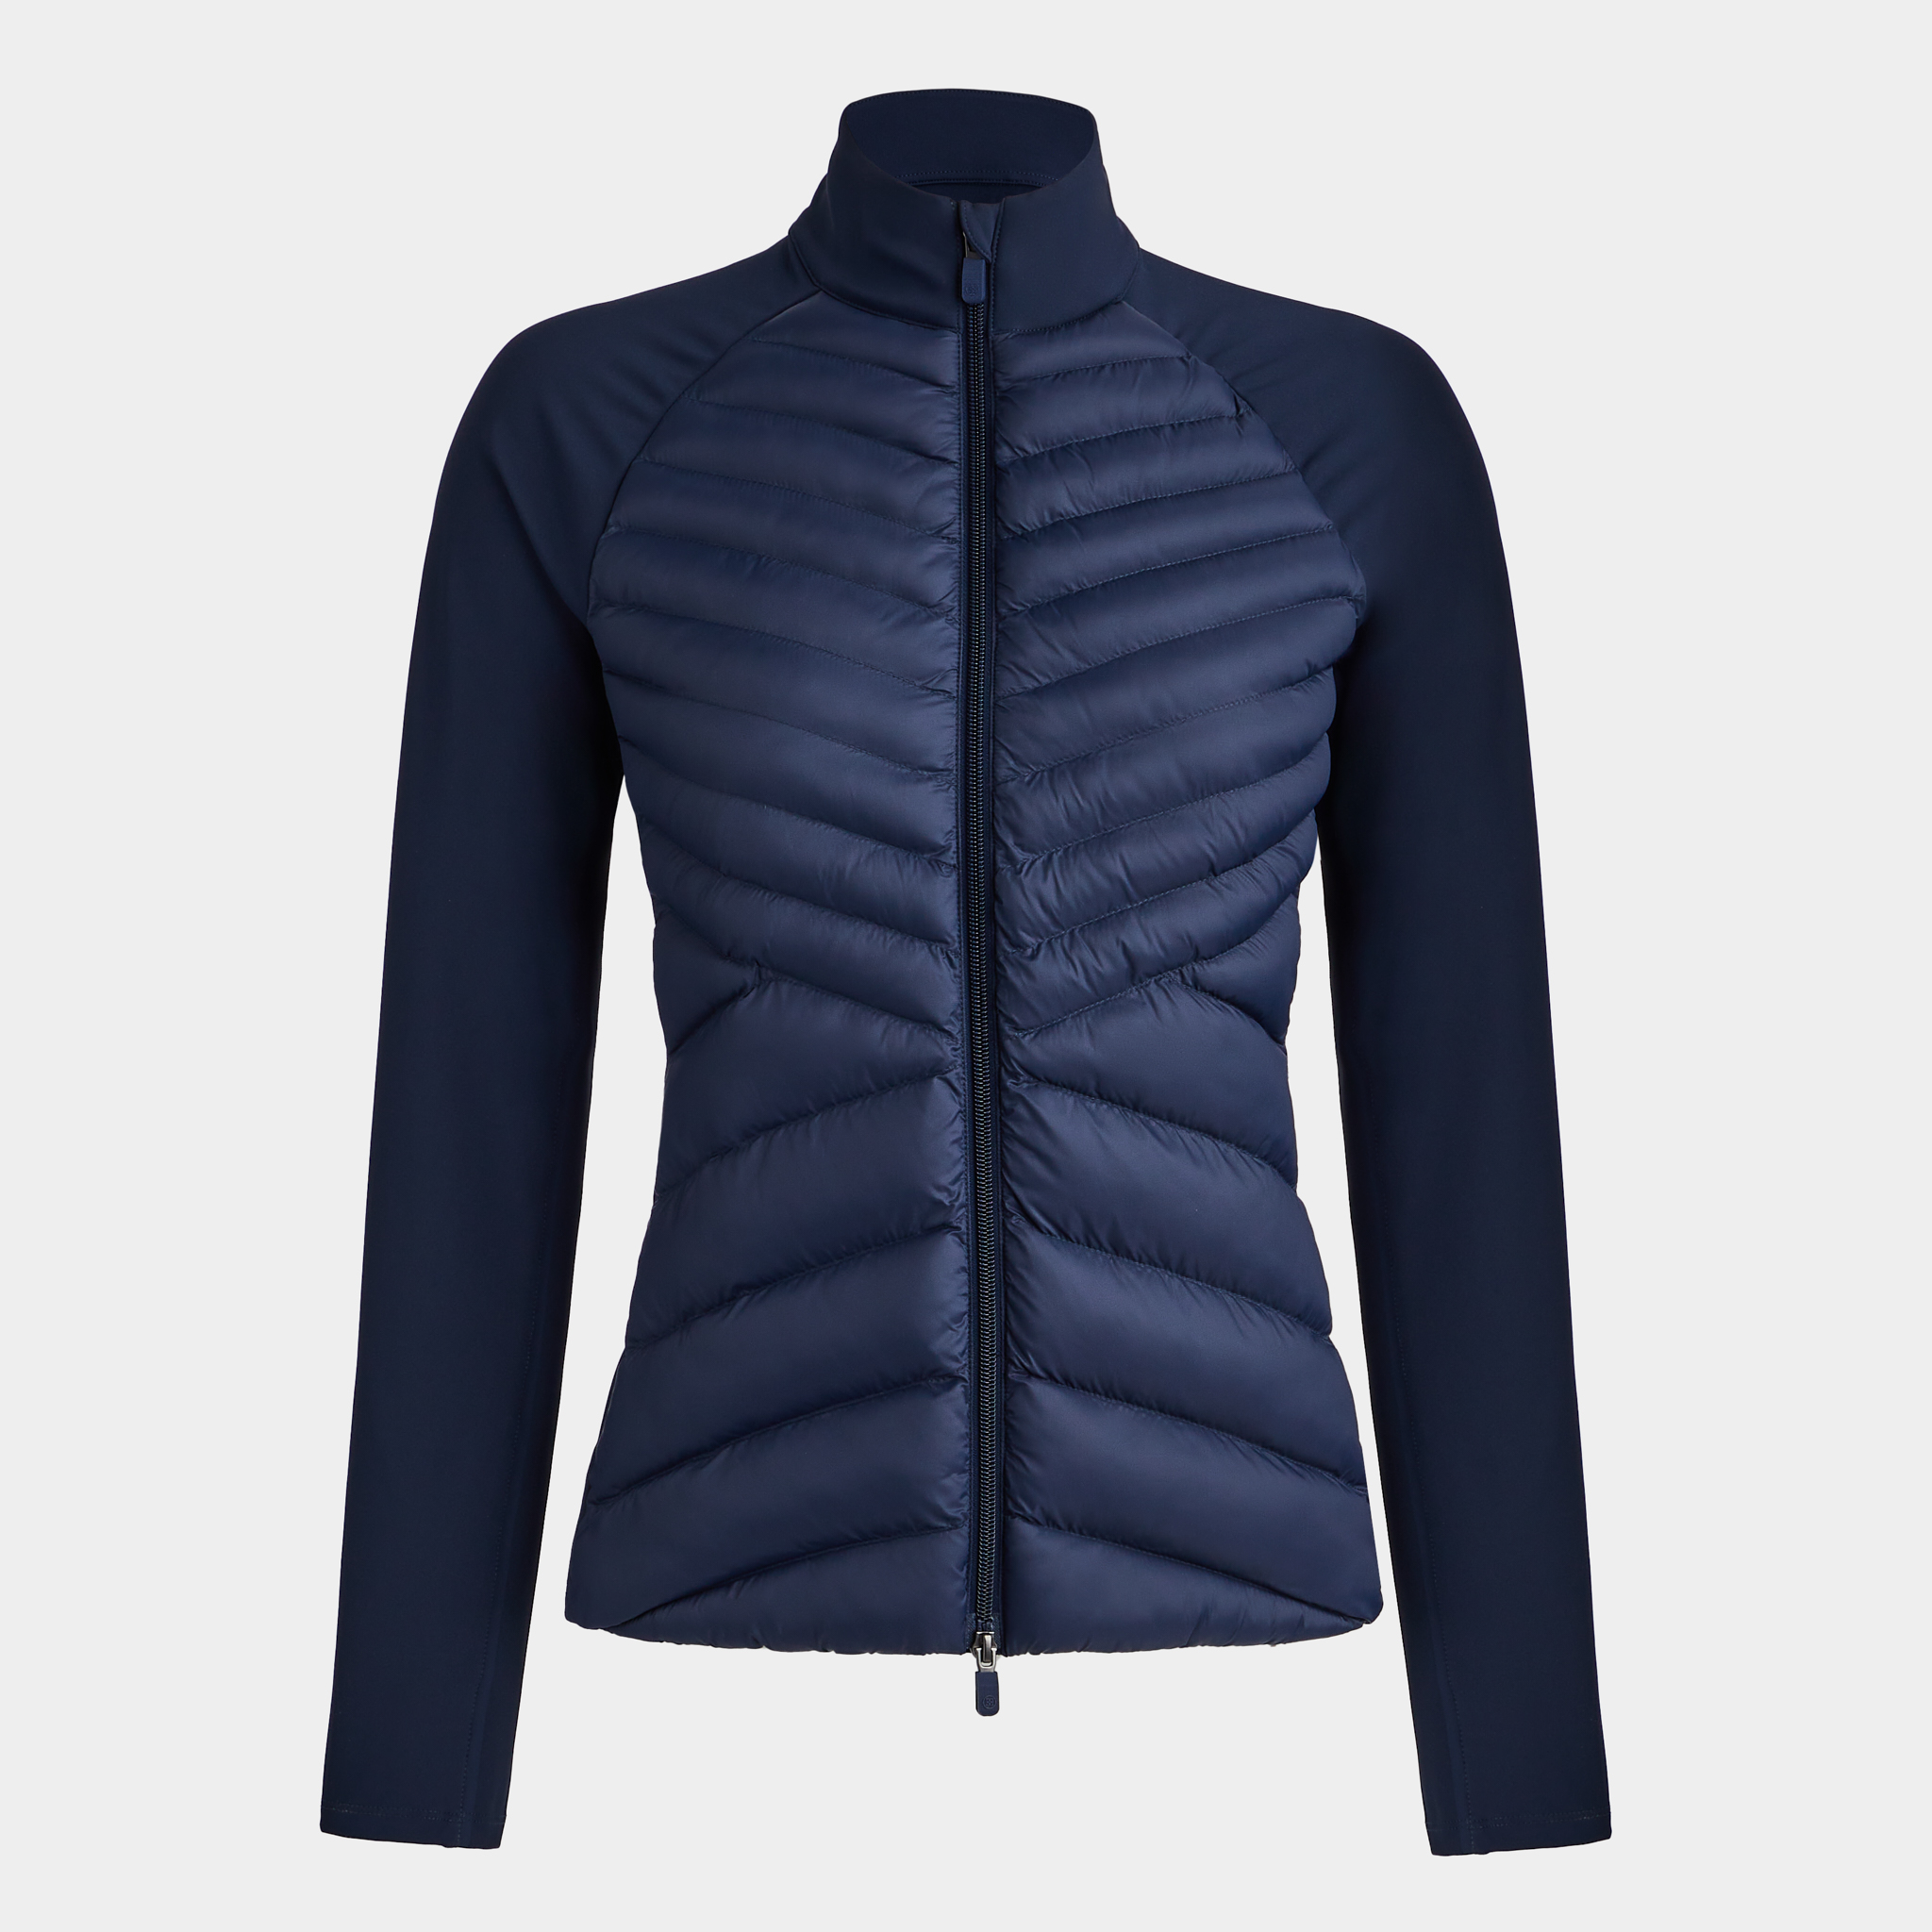 HYBRID QUILTED TECH INTERLOCK JACKET | WOMEN'S JACKETS & VESTS | G/FORE